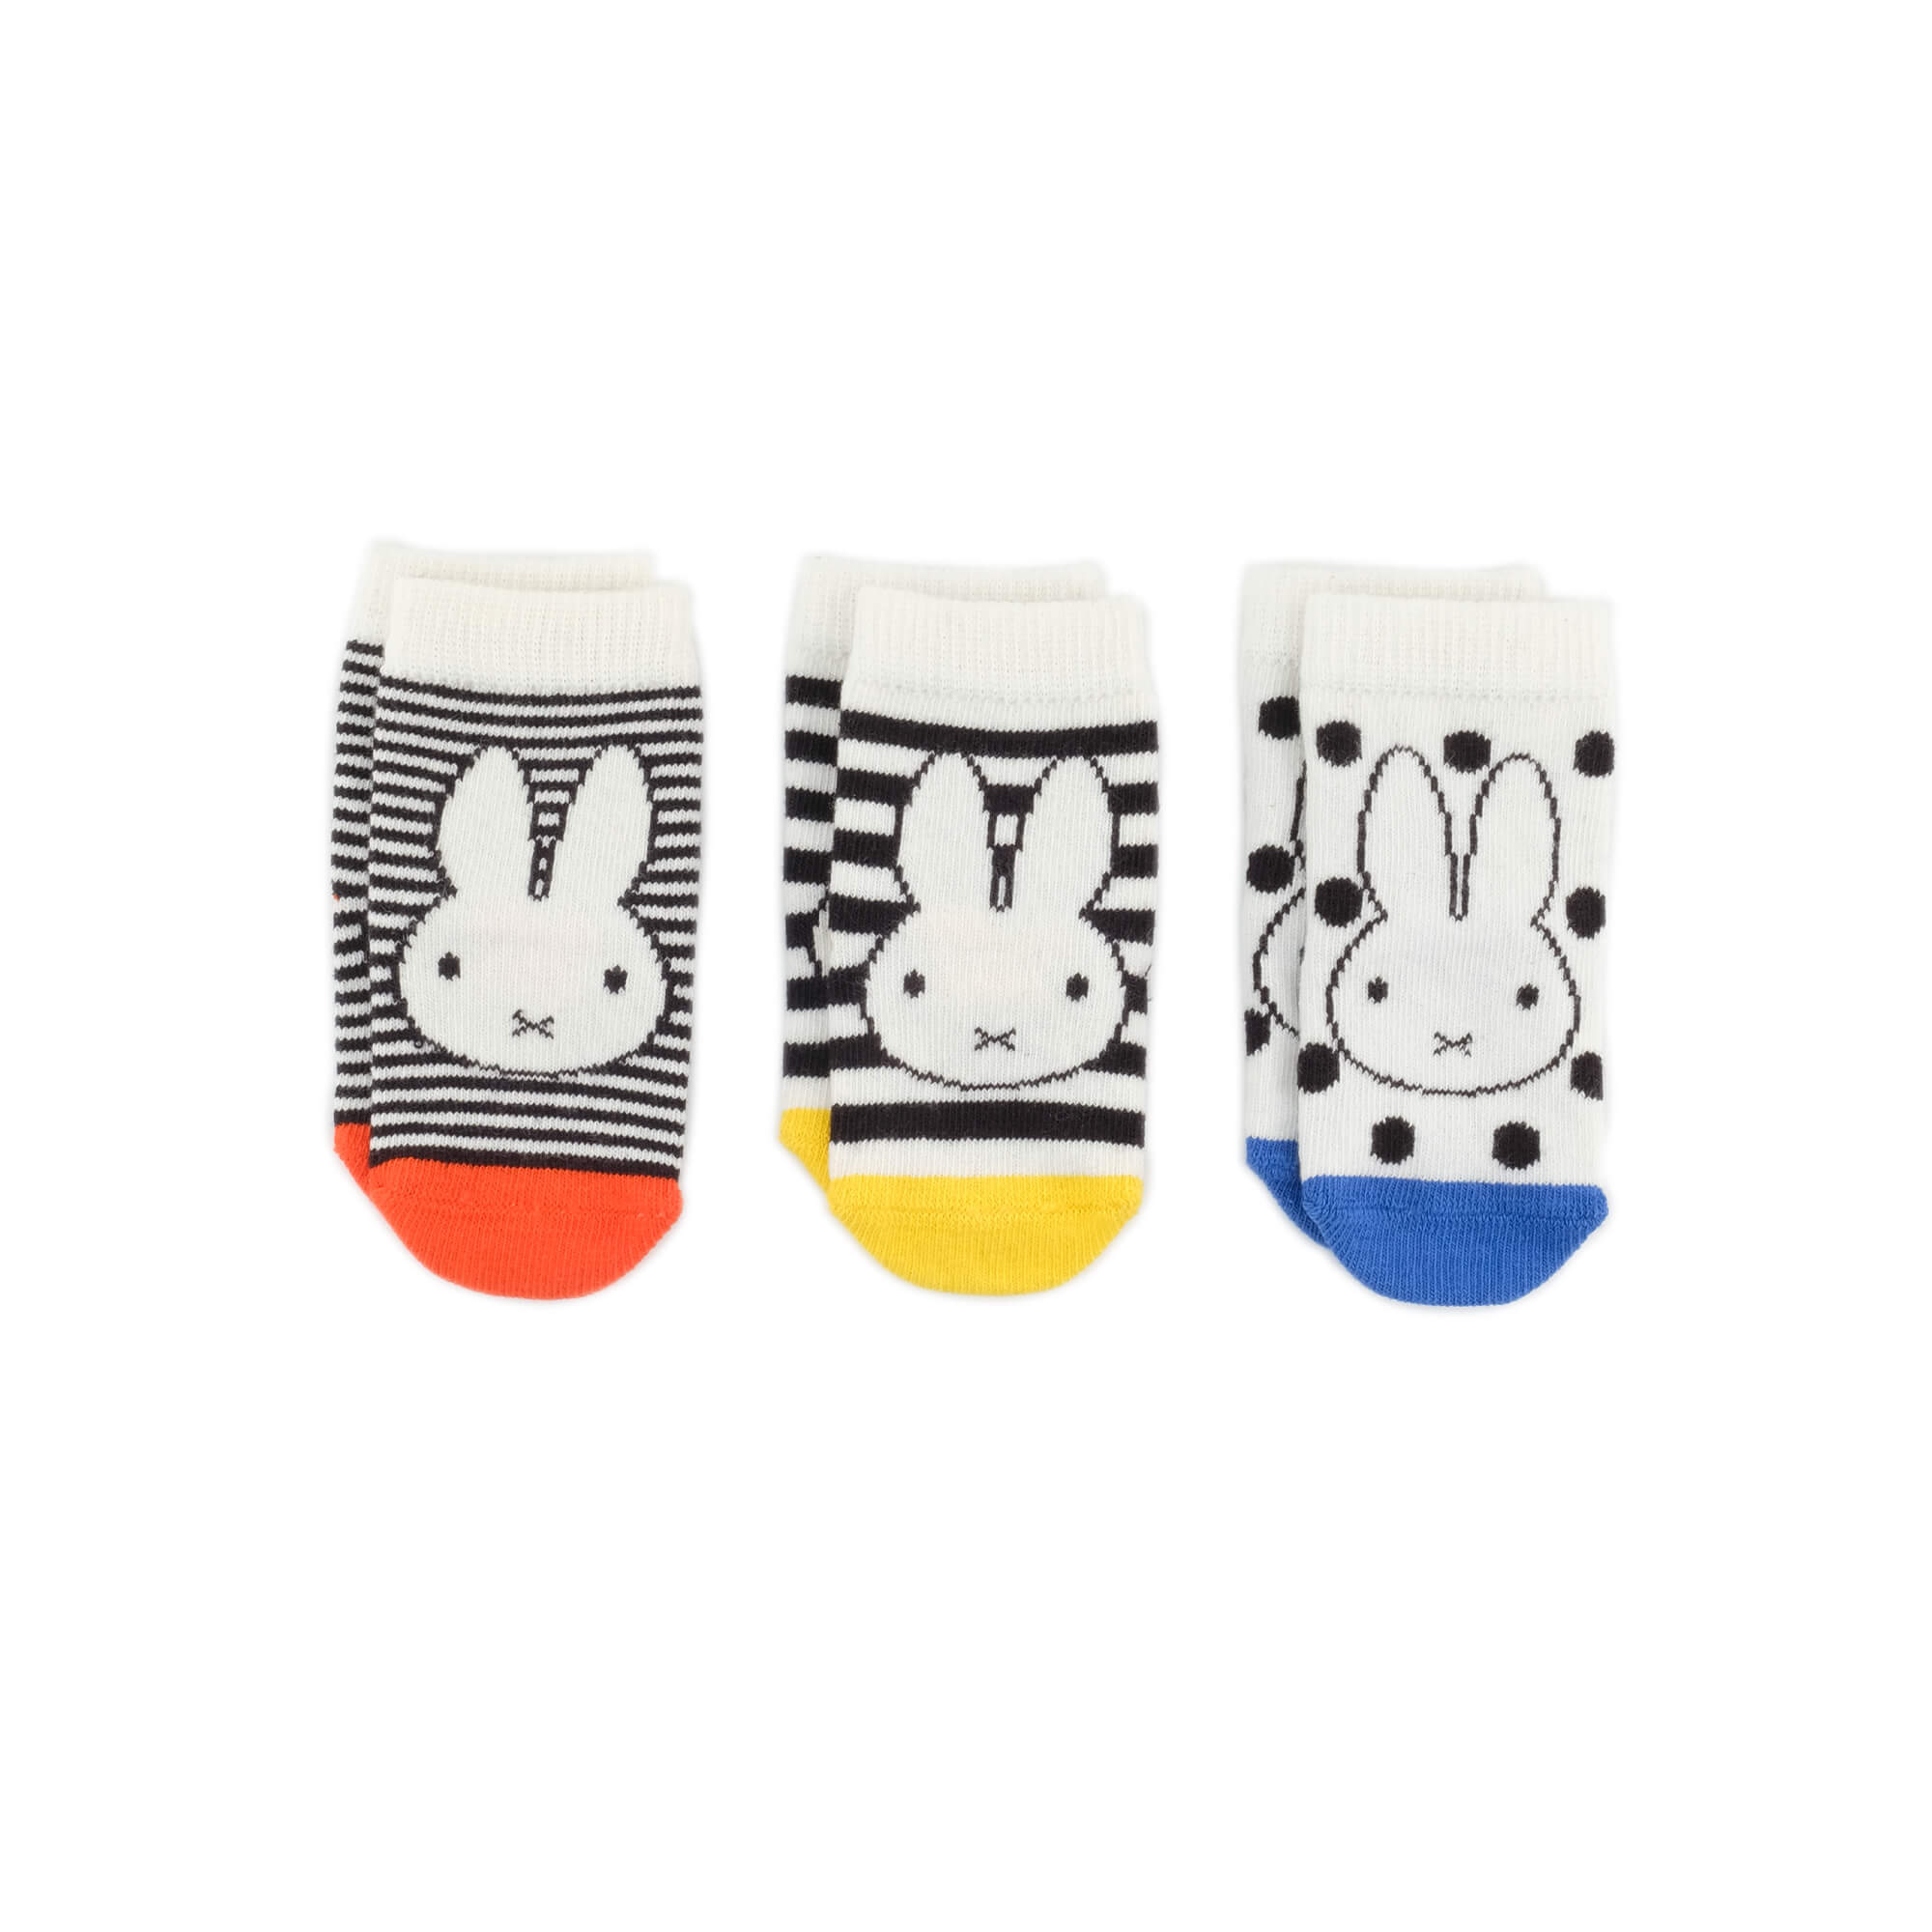 Baby Socks - Miffy x Etiquette Classic Baby Socks Gift Box - nijntje colorful baby socks - product front view⎪Lil'Etiquette Clothiers